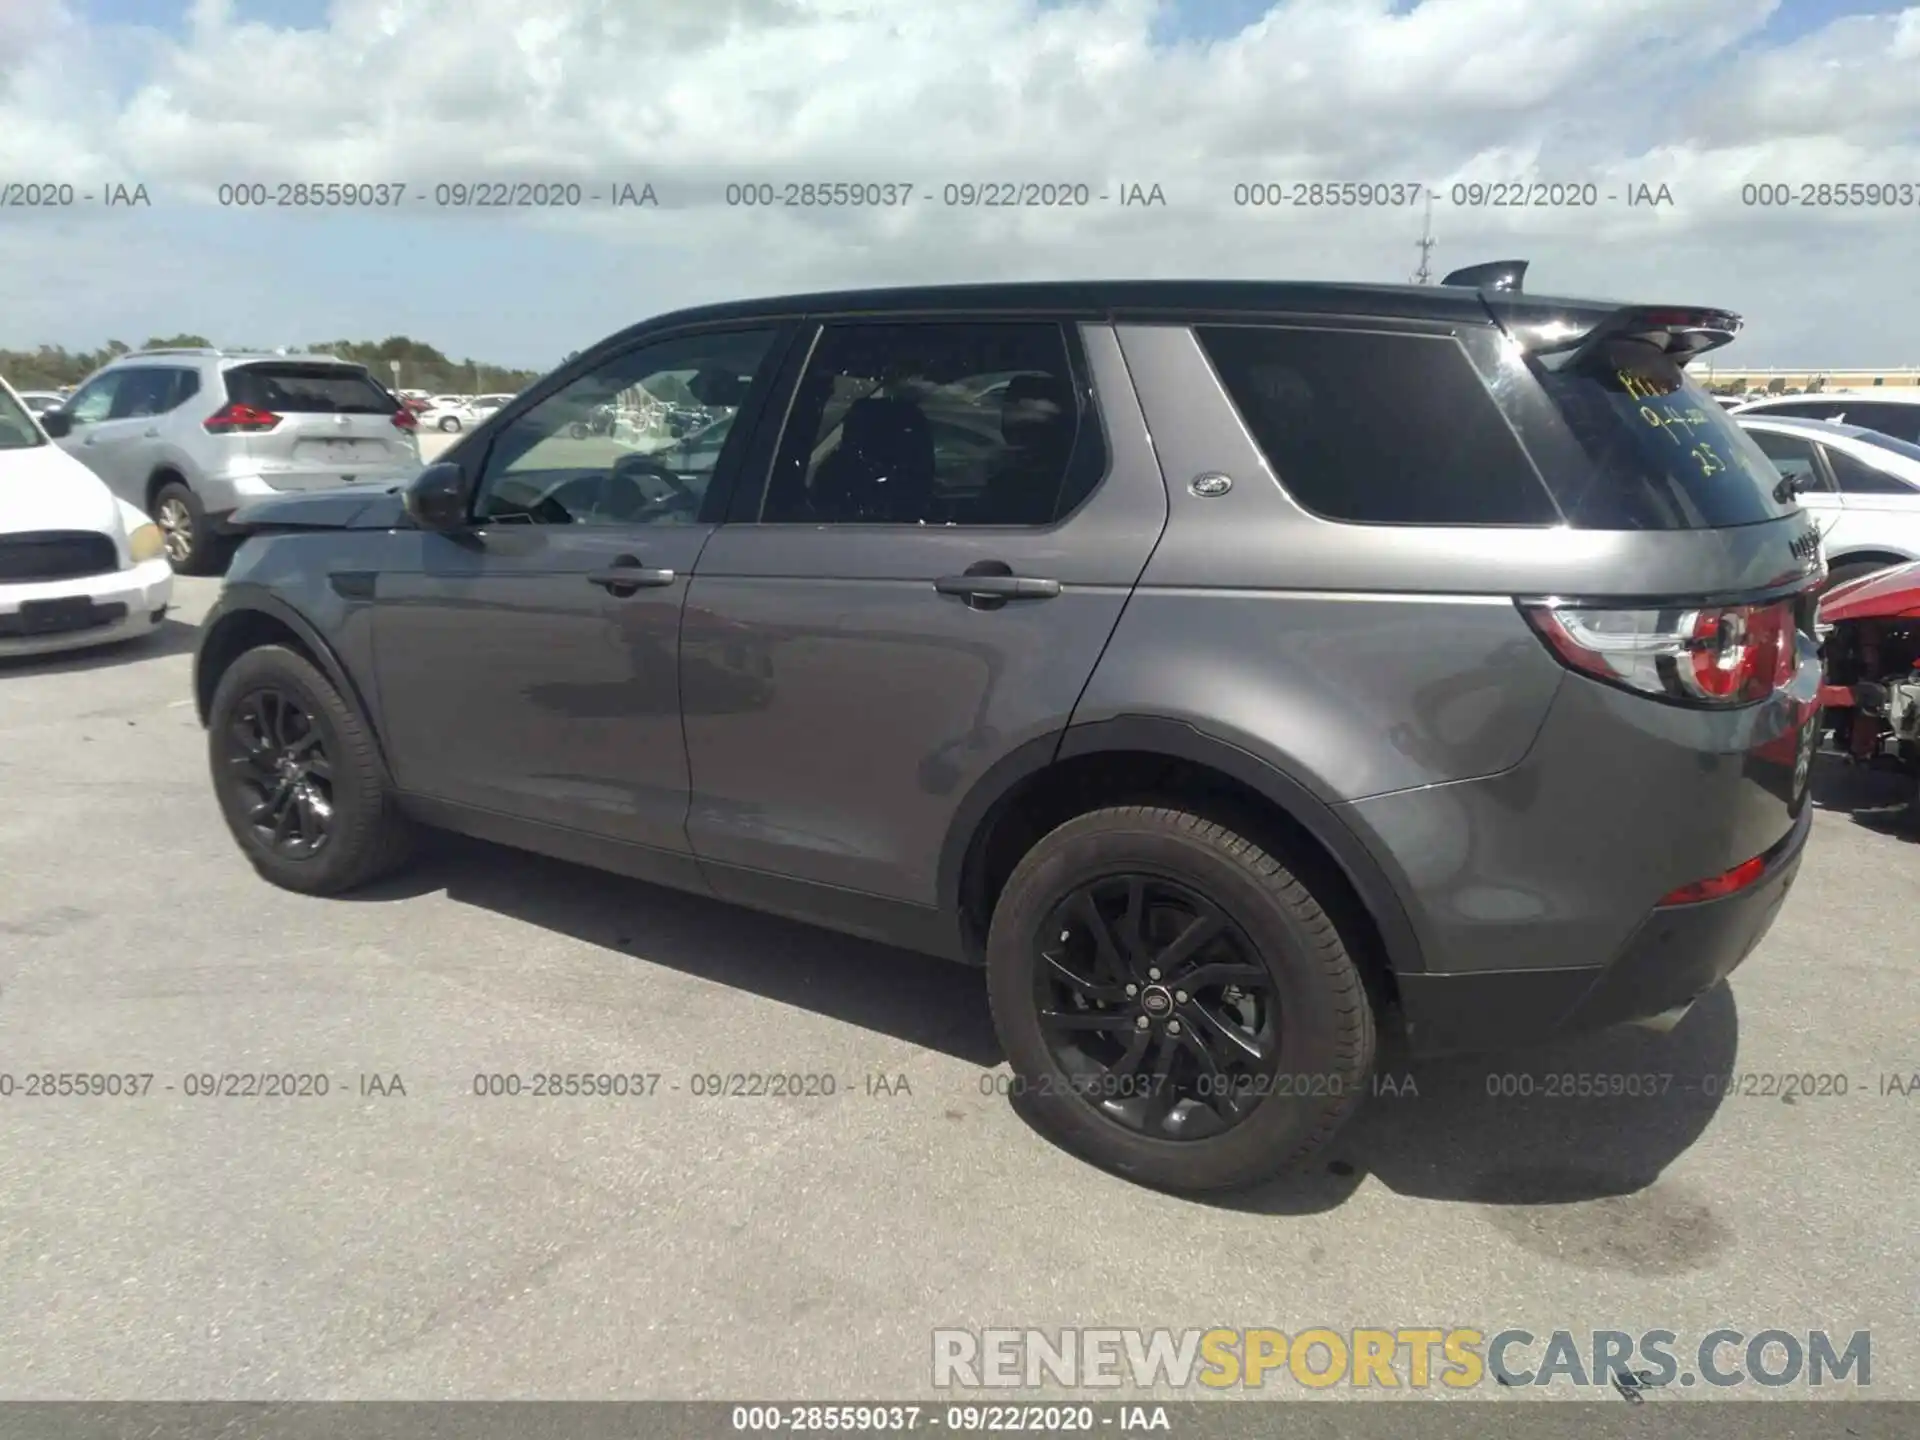 3 Photograph of a damaged car SALCP2FX9KH821278 LAND ROVER DISCOVERY SPORT 2019